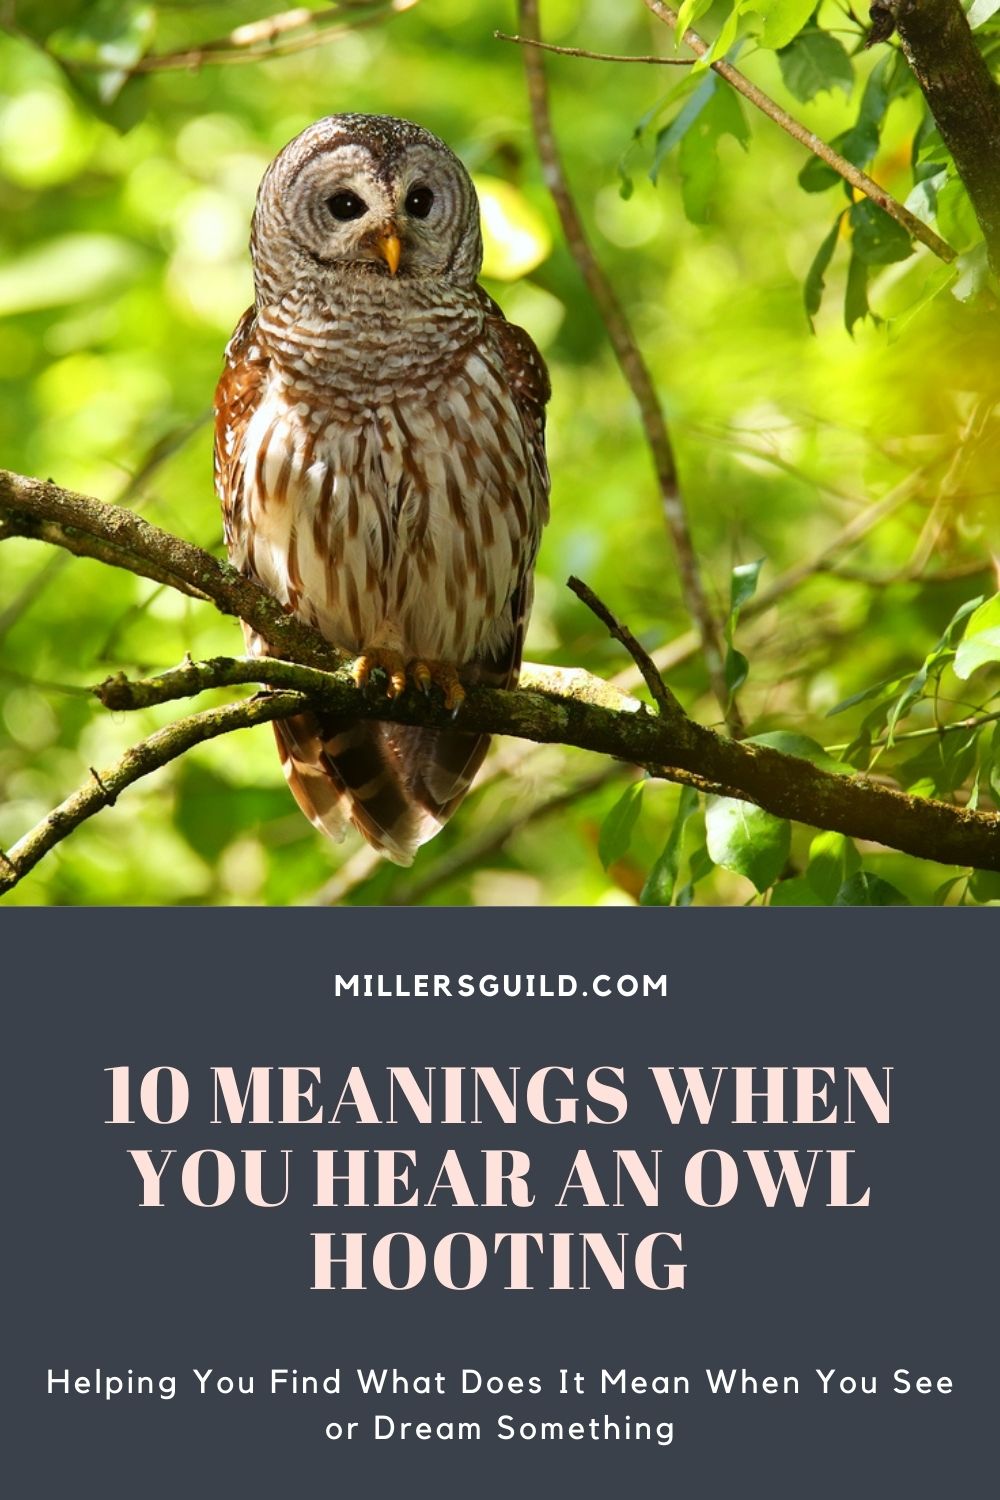 10 Meanings When You Hear an Owl Hooting 2